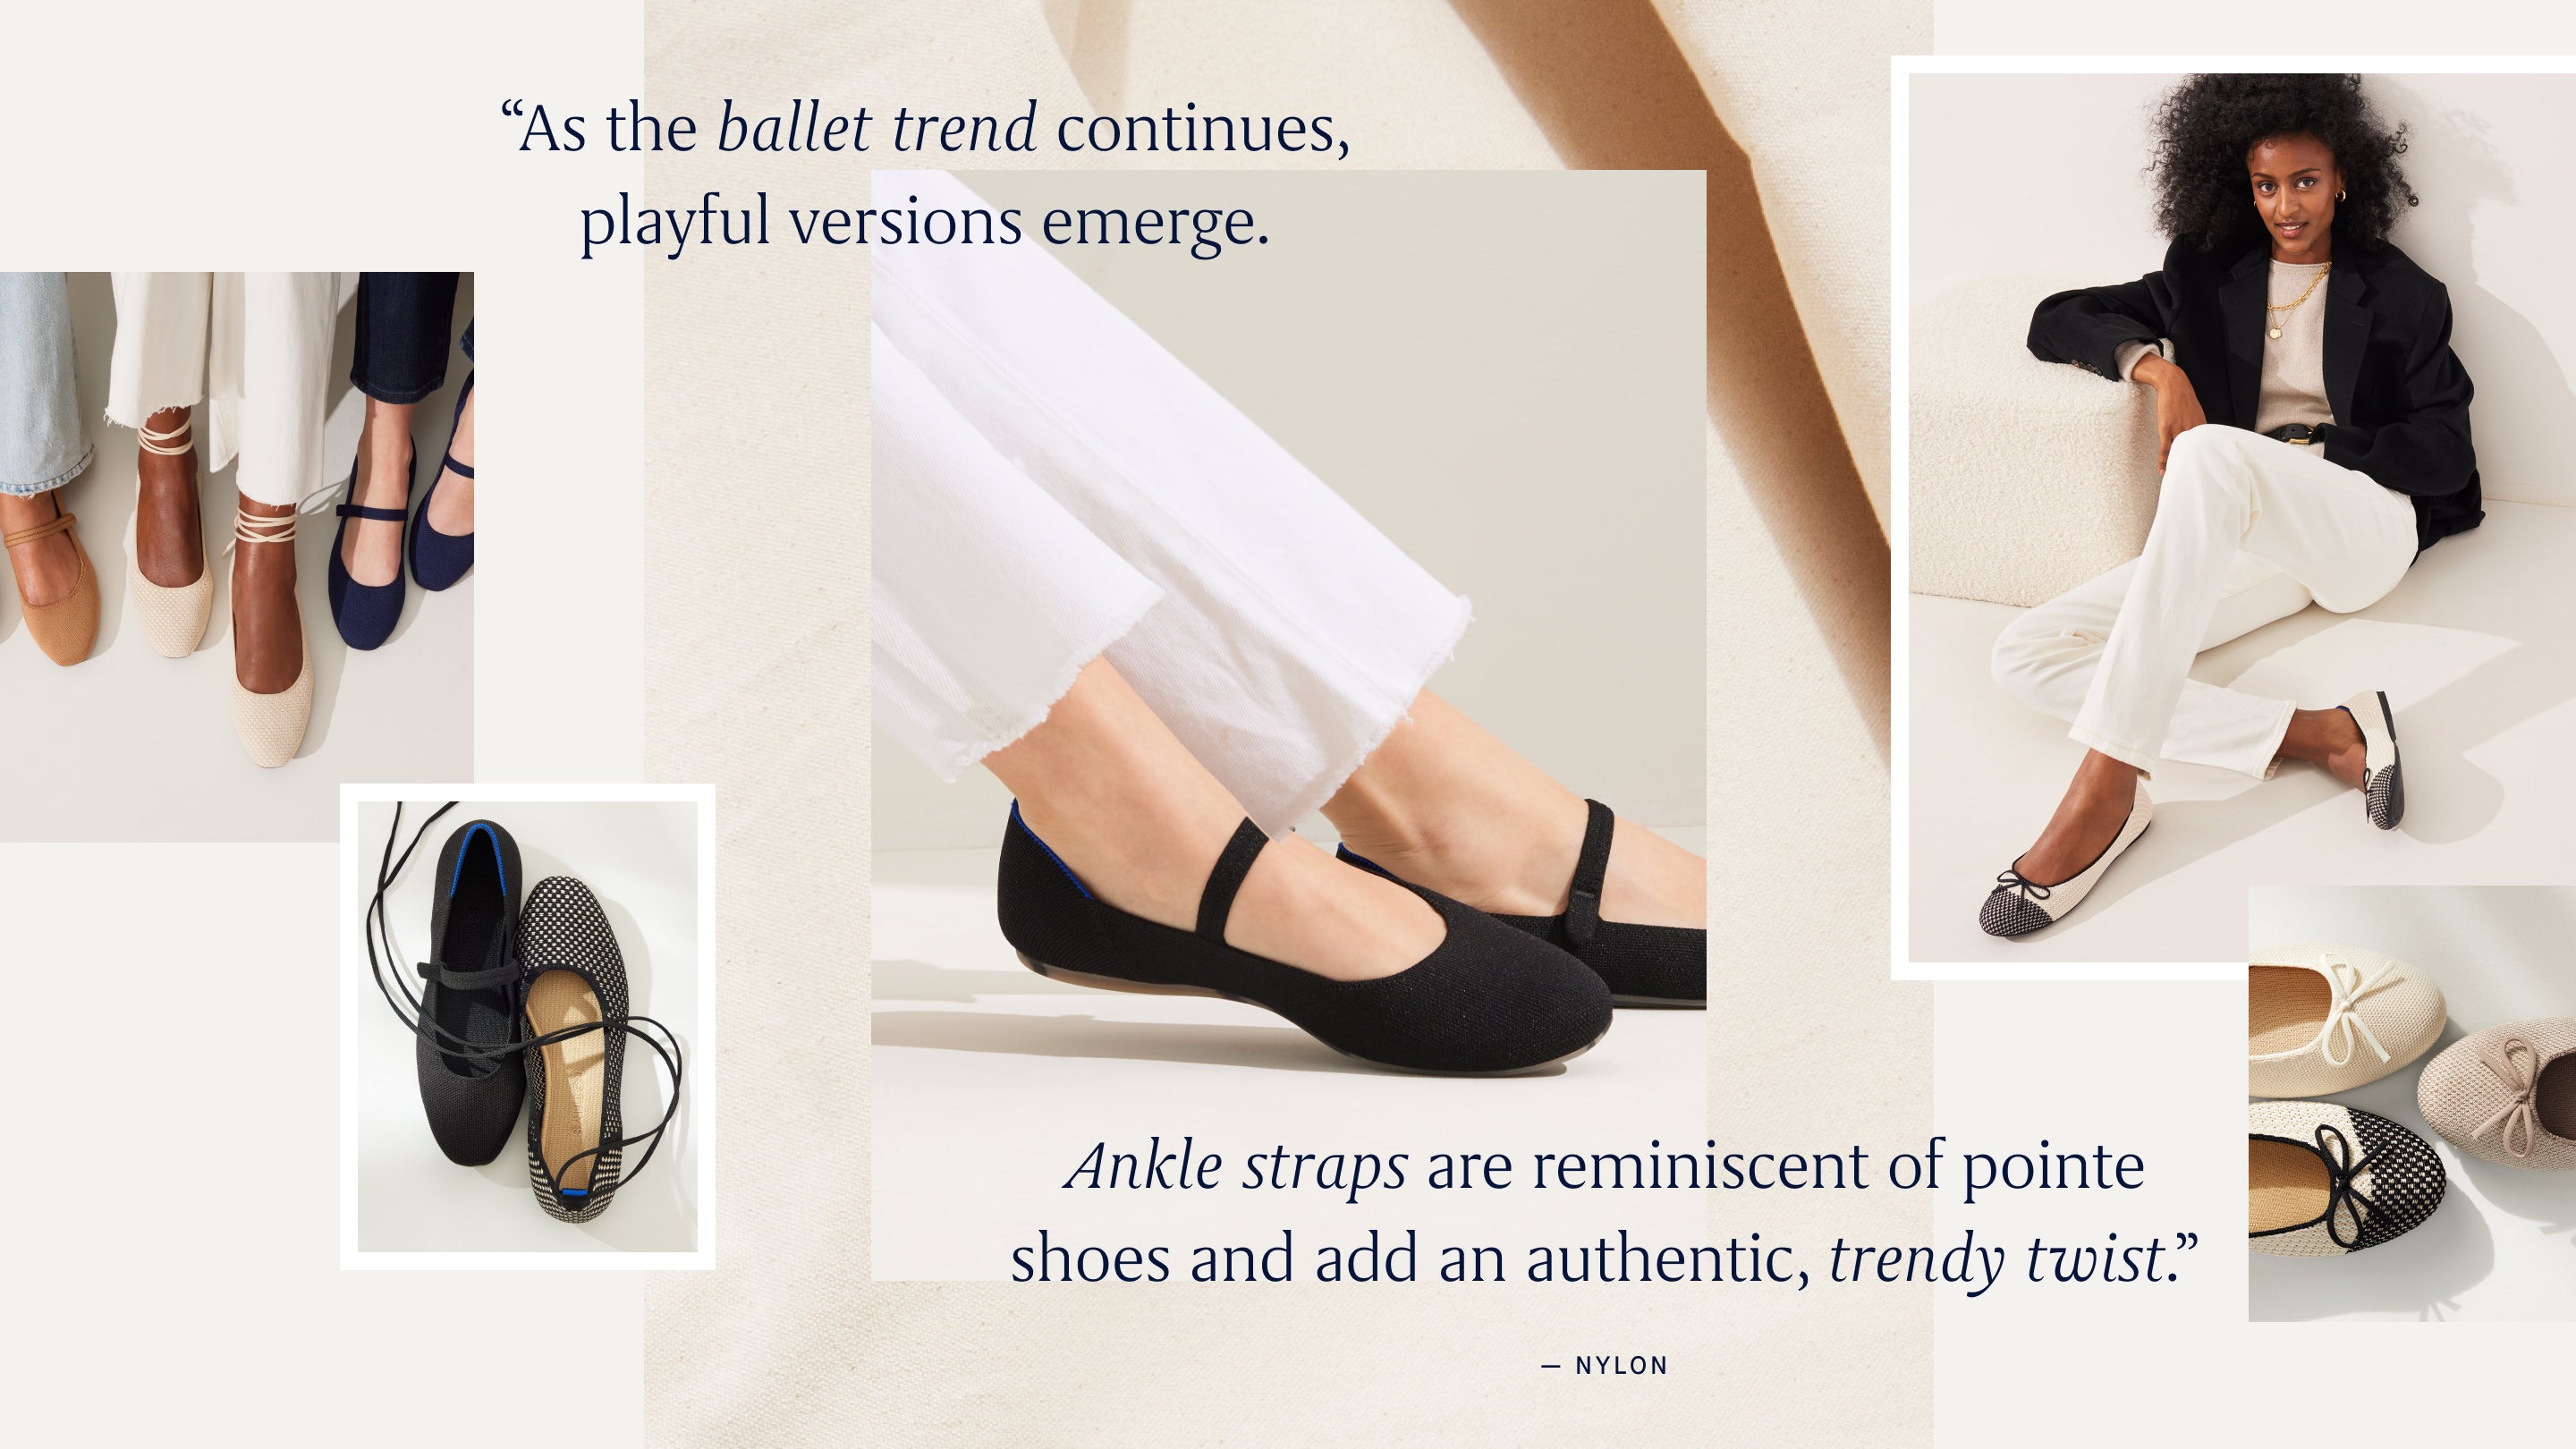 "As the ballet trend continues playful versions emerge. Ankle straps are reminiscent of pointe shoes and add an authentic, trendy twist."